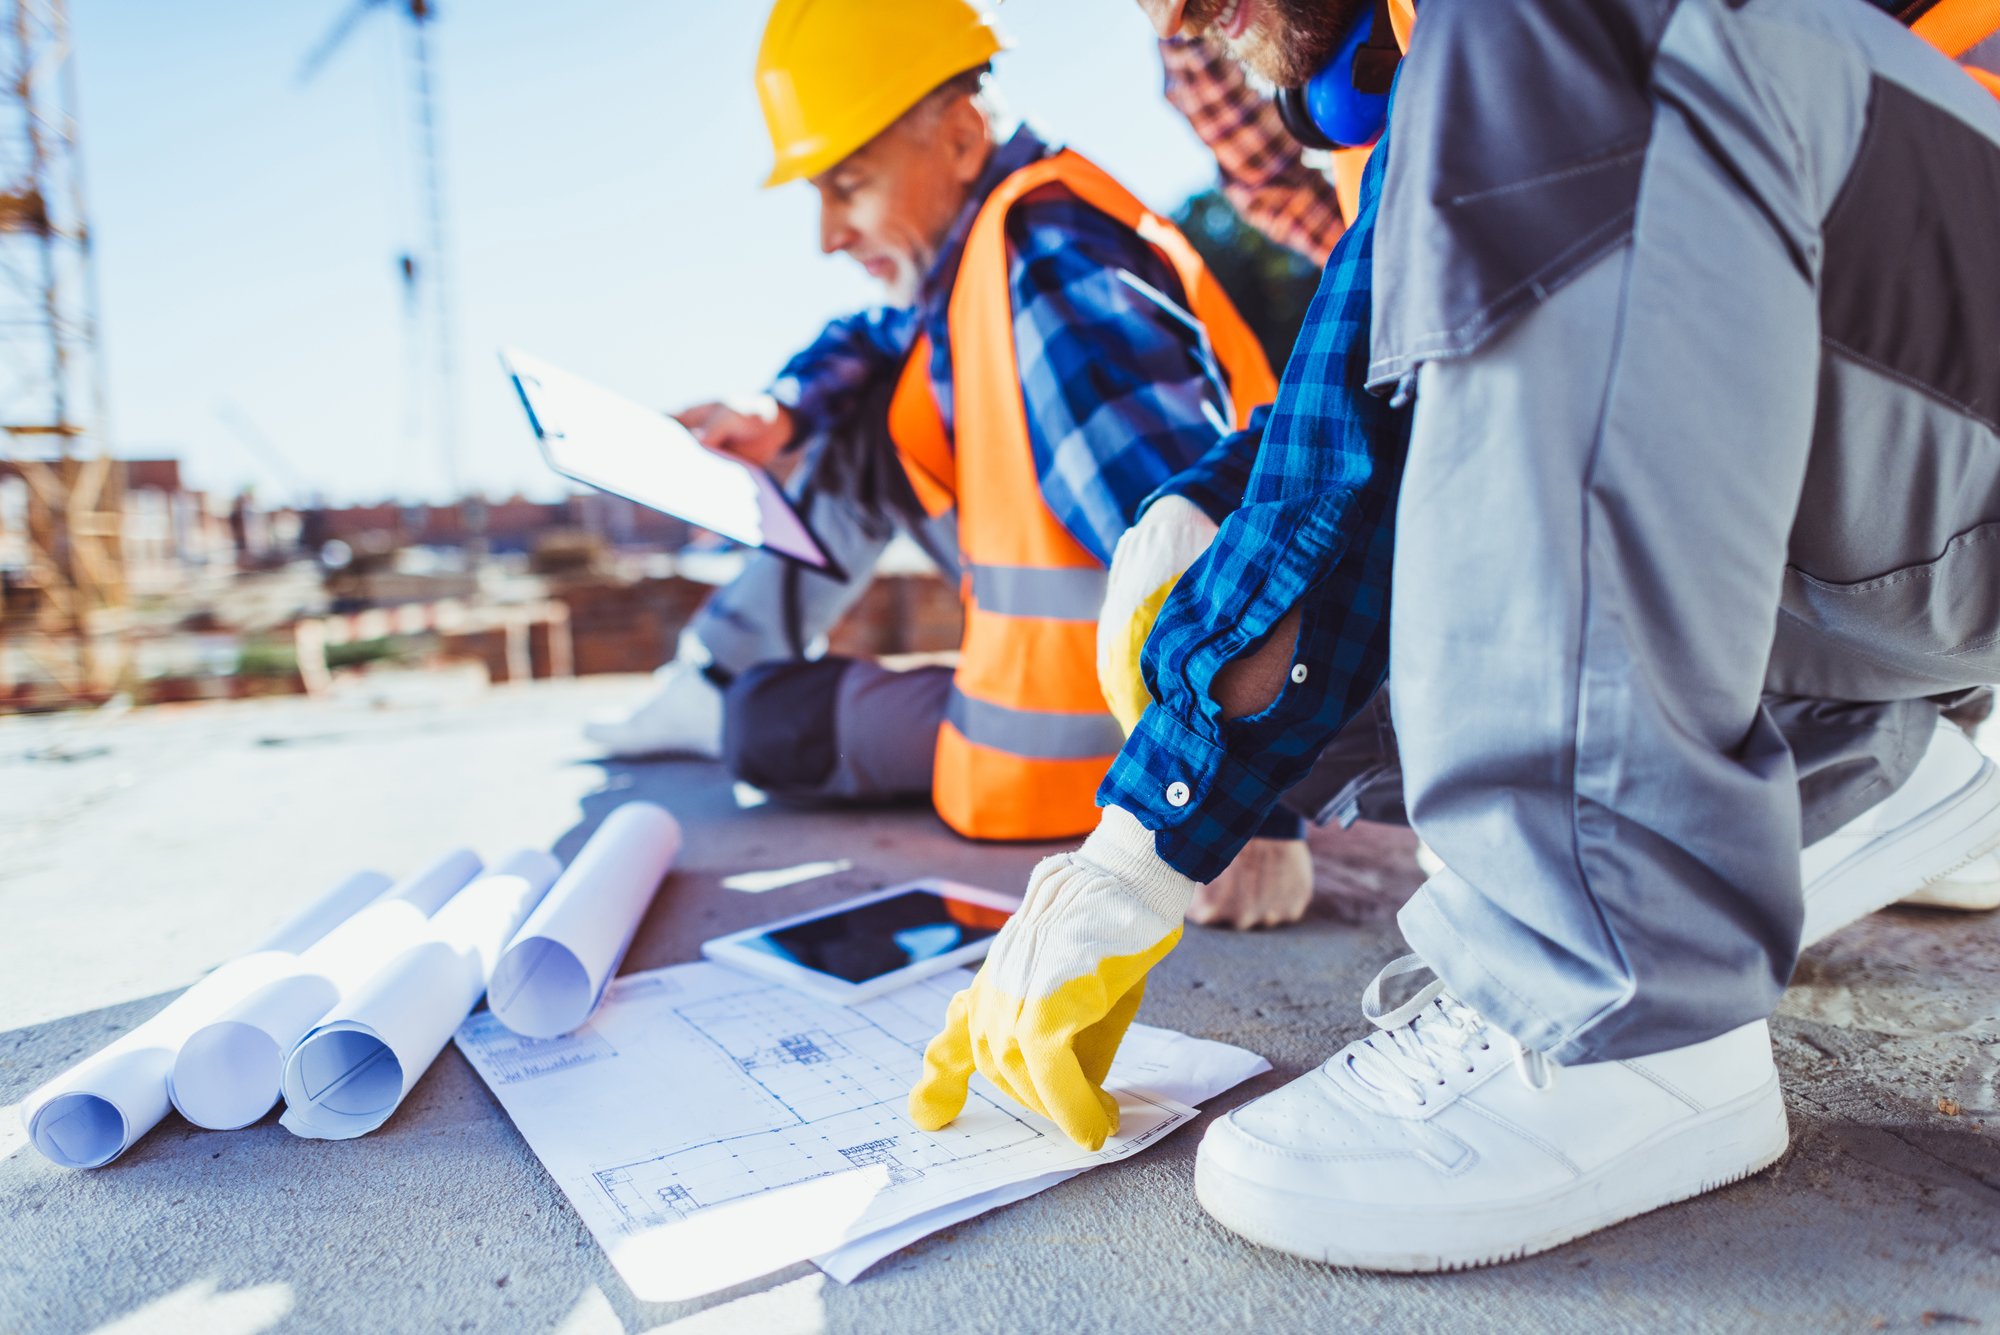 Business Intelligence: “The Last Mile” for the Construction Industry